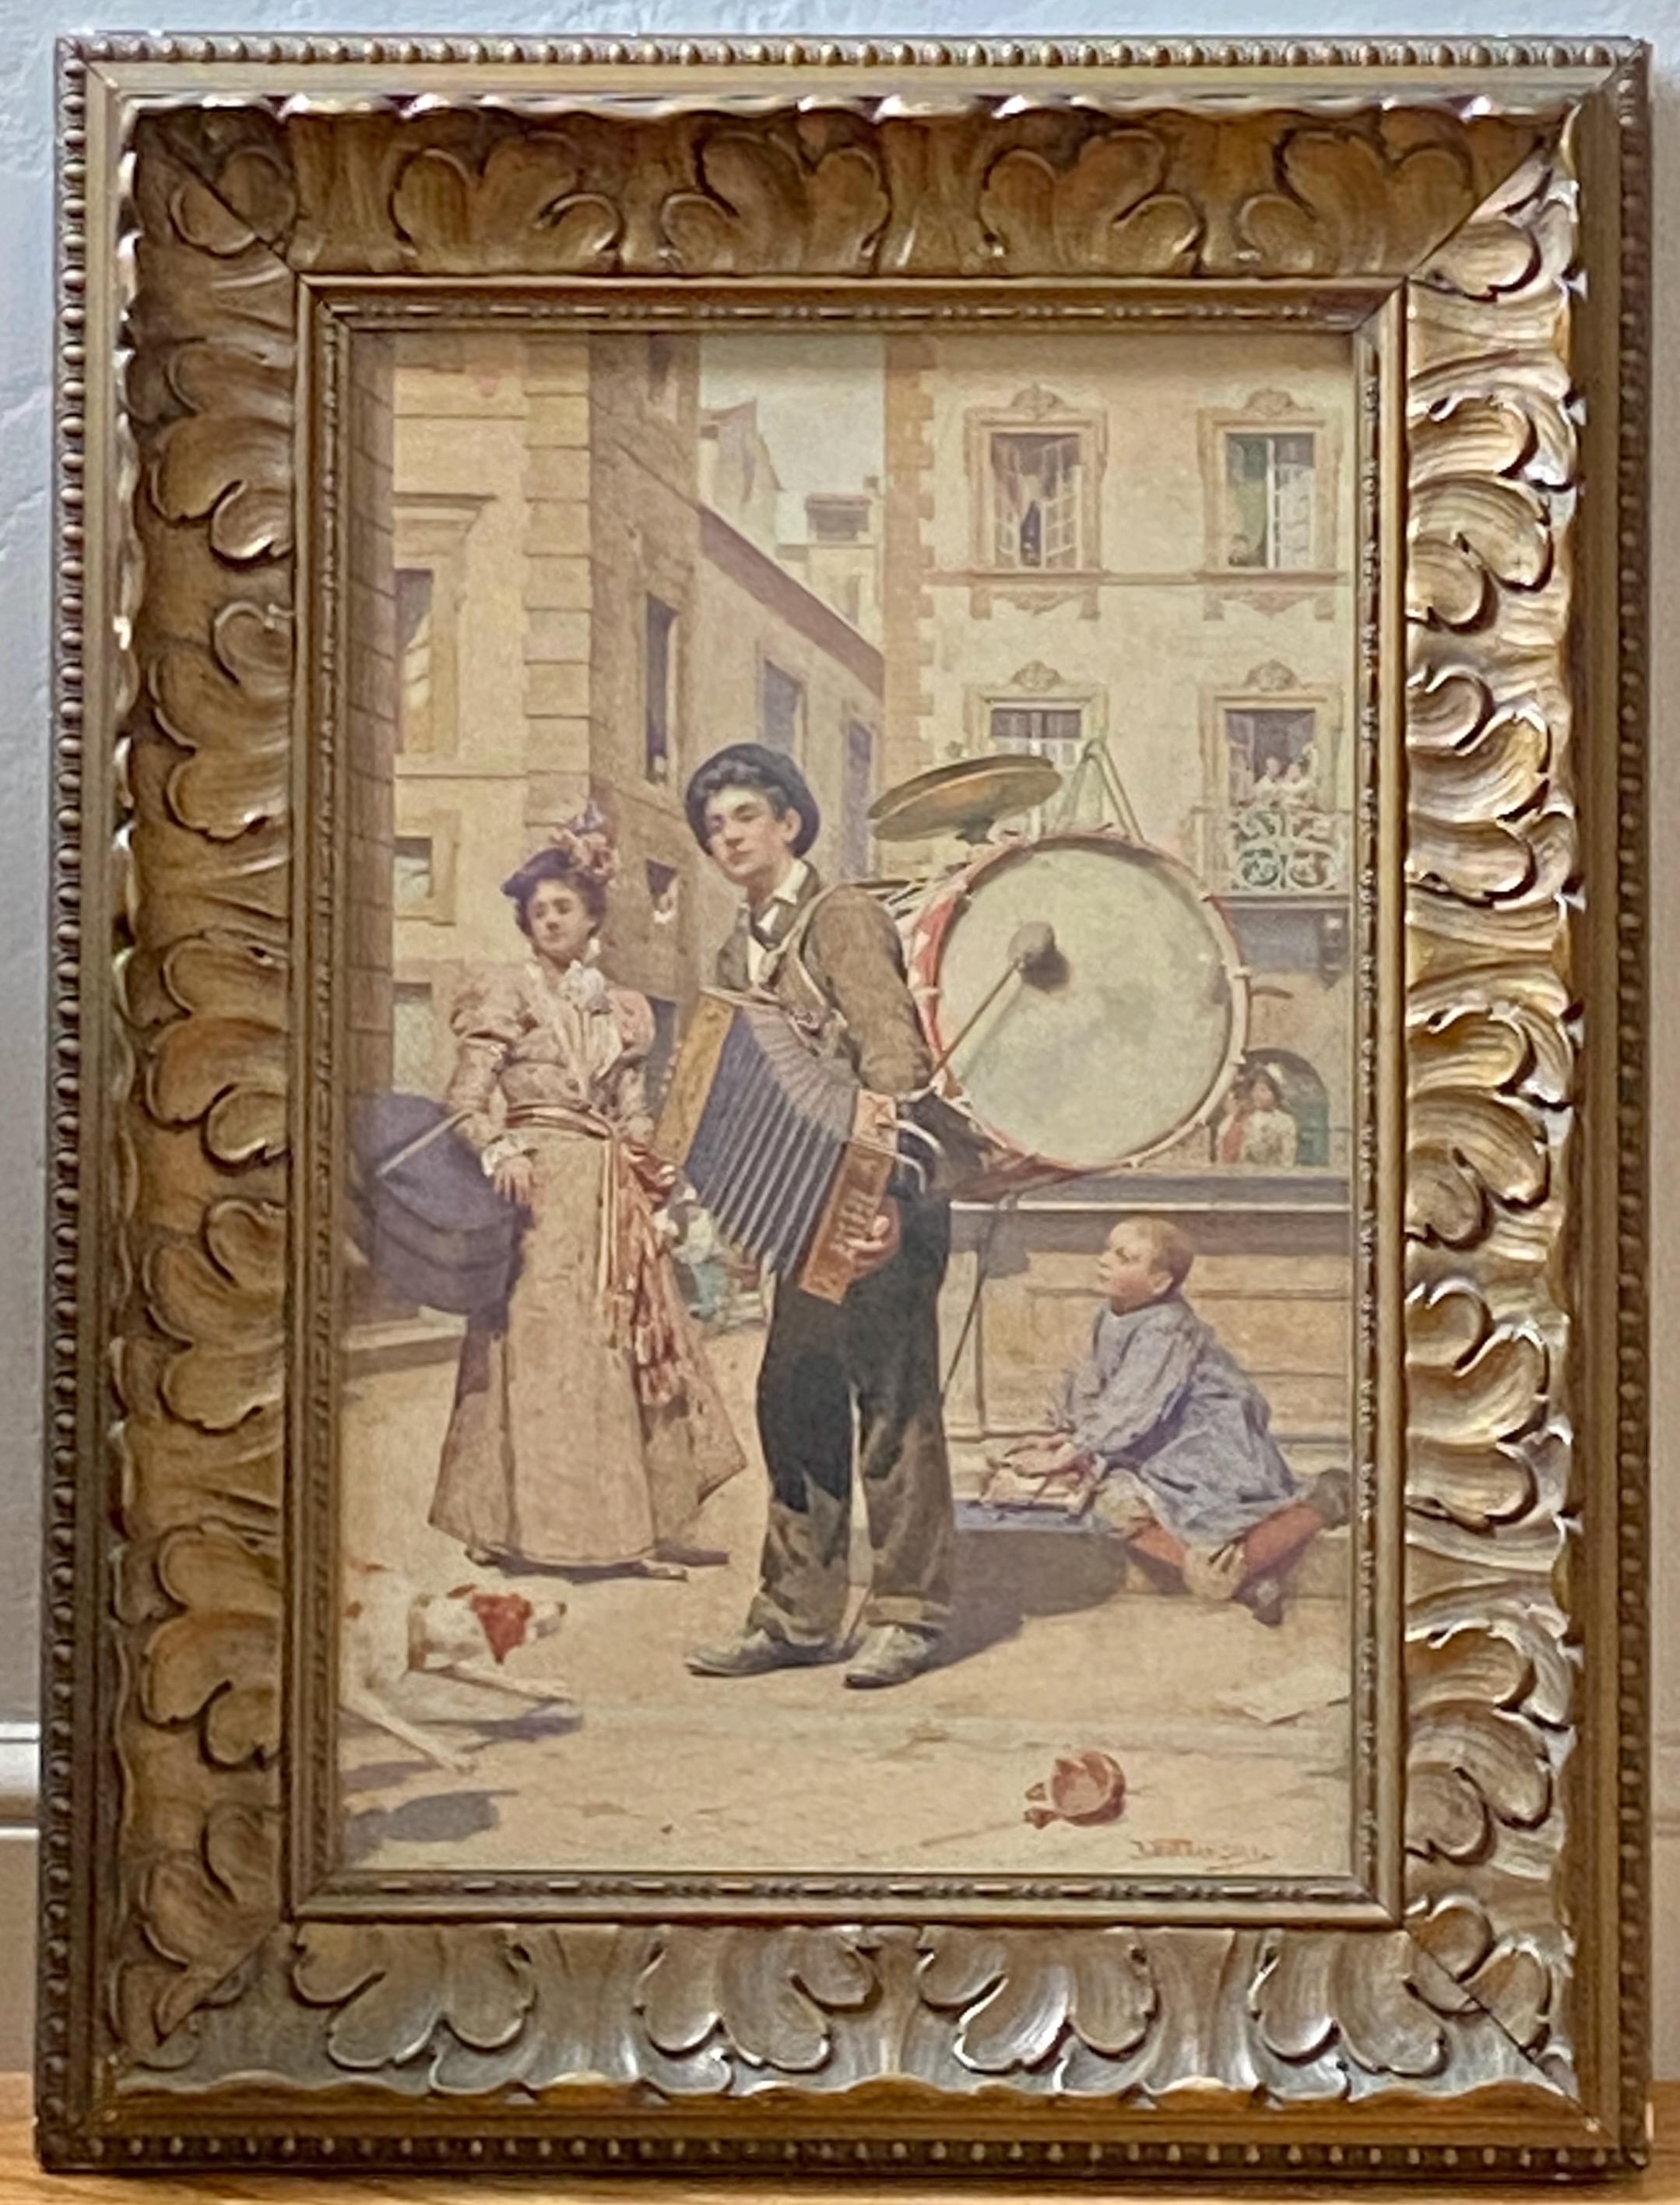 Painting of an Italian street scene with a musician.
Framed oil on paper behind glass.
Signed V Baldancoli lower right.
Vittorio Baldancoli (19th century) was active/lived in Italy. 
In very good condition, possibly some light fading.